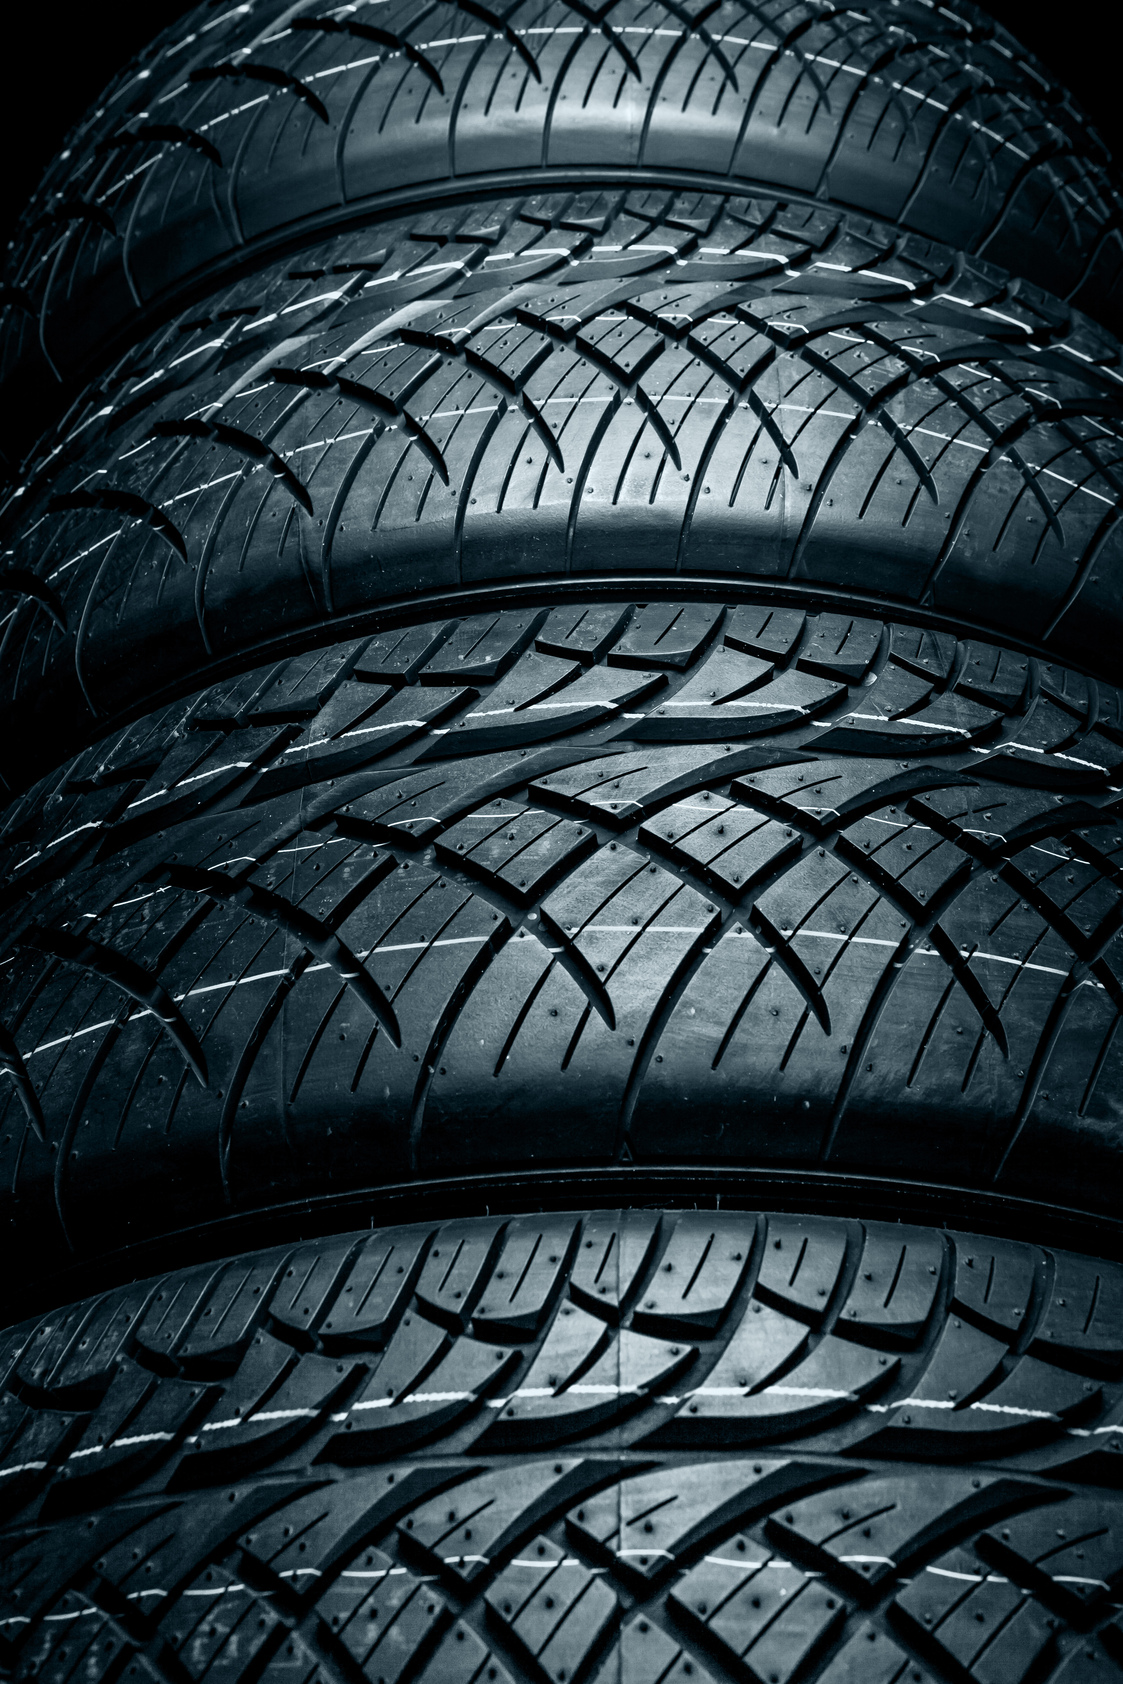 new-tyres-background-car-tyres-c